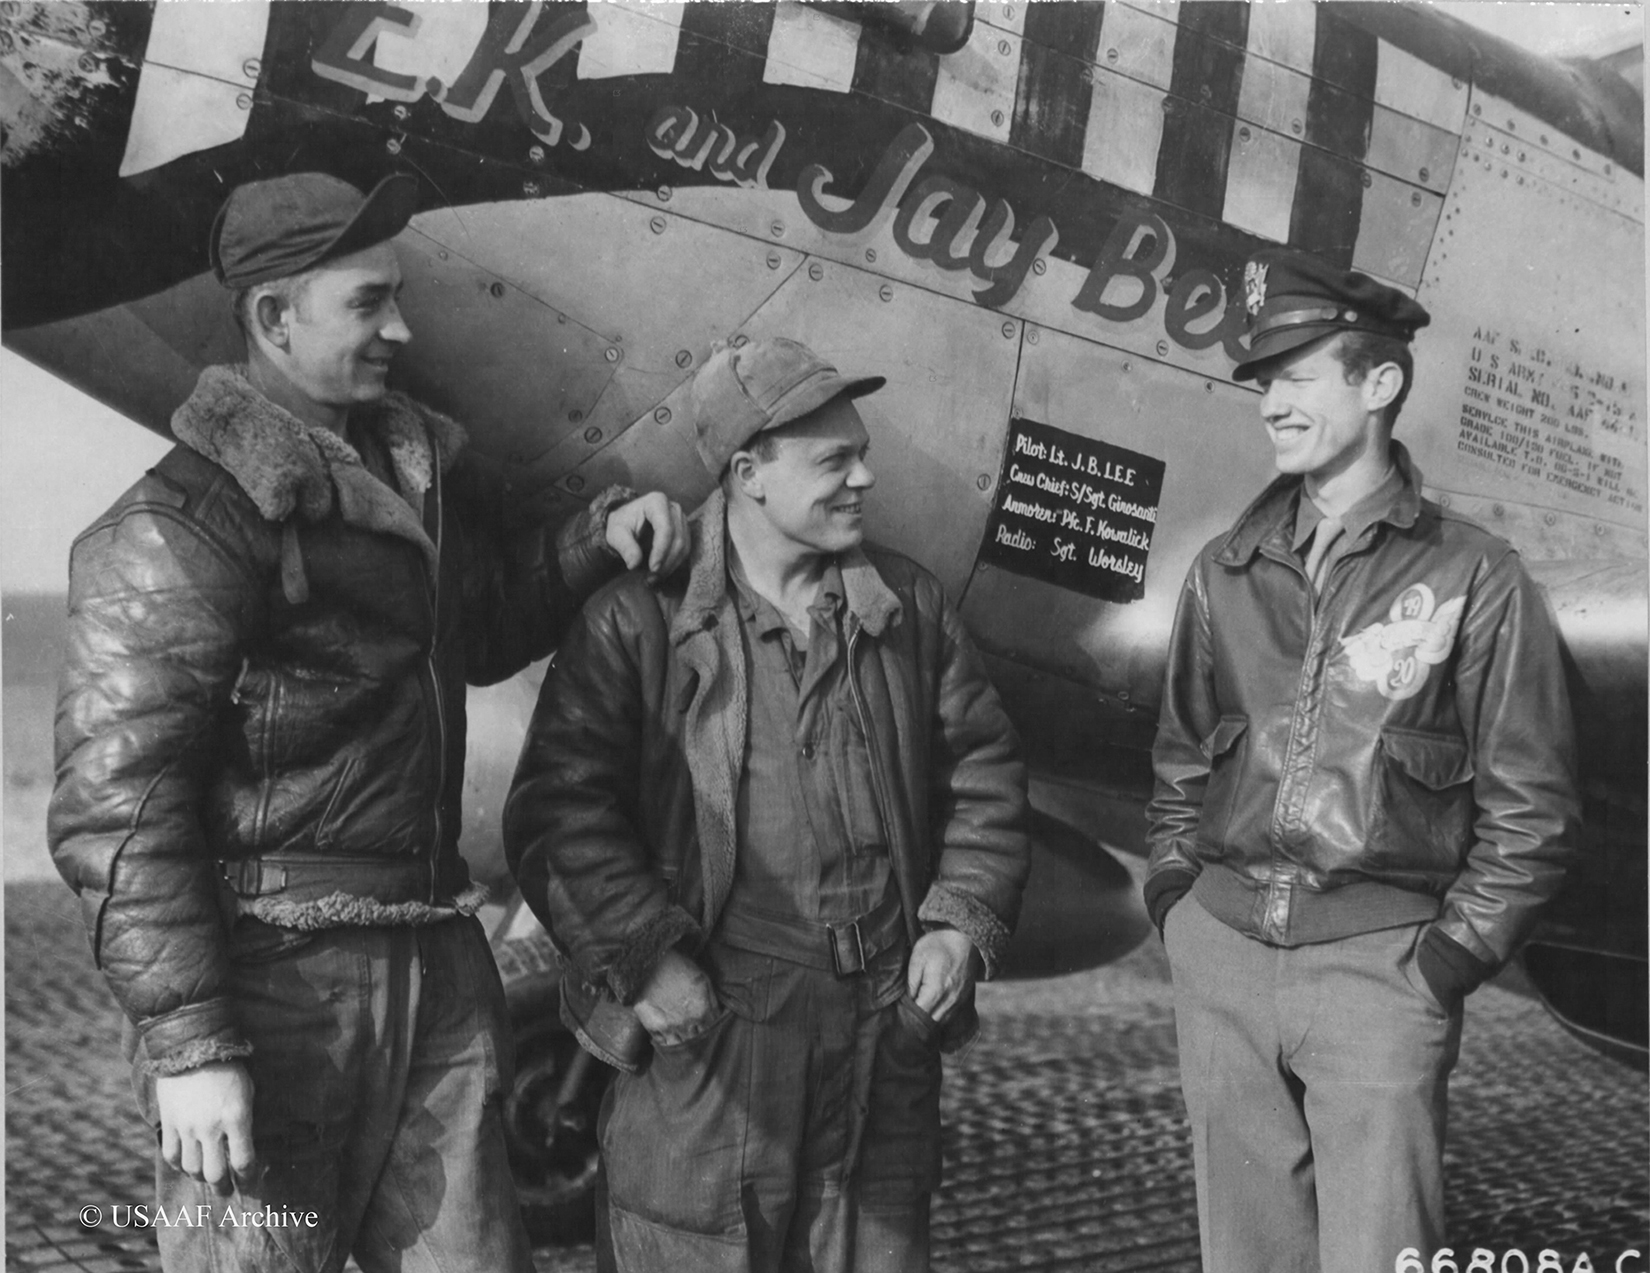 01 US Air Force A 2 Crew P 51 USAF Archive Kopie